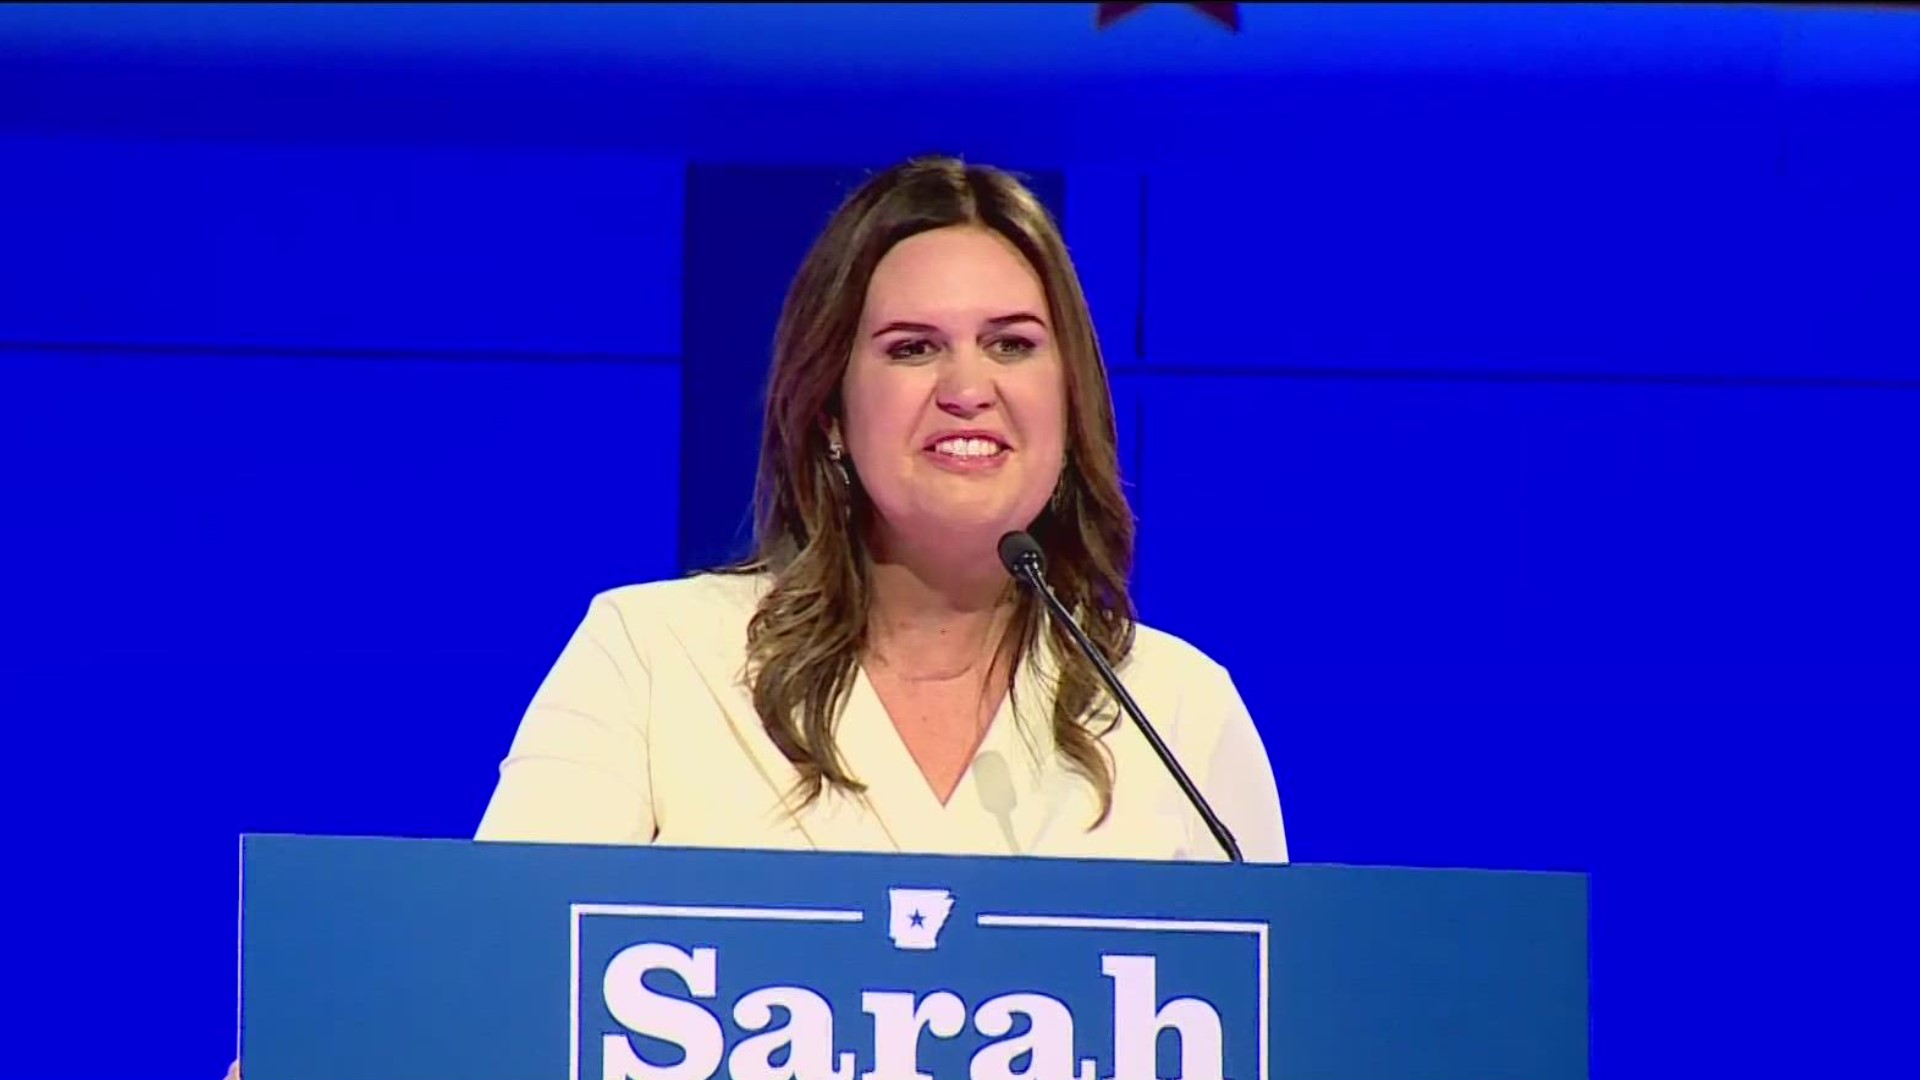 The race for Arkansas governor was called moments after the polls closed, declaring Sarah Huckabee Sanders the winner.